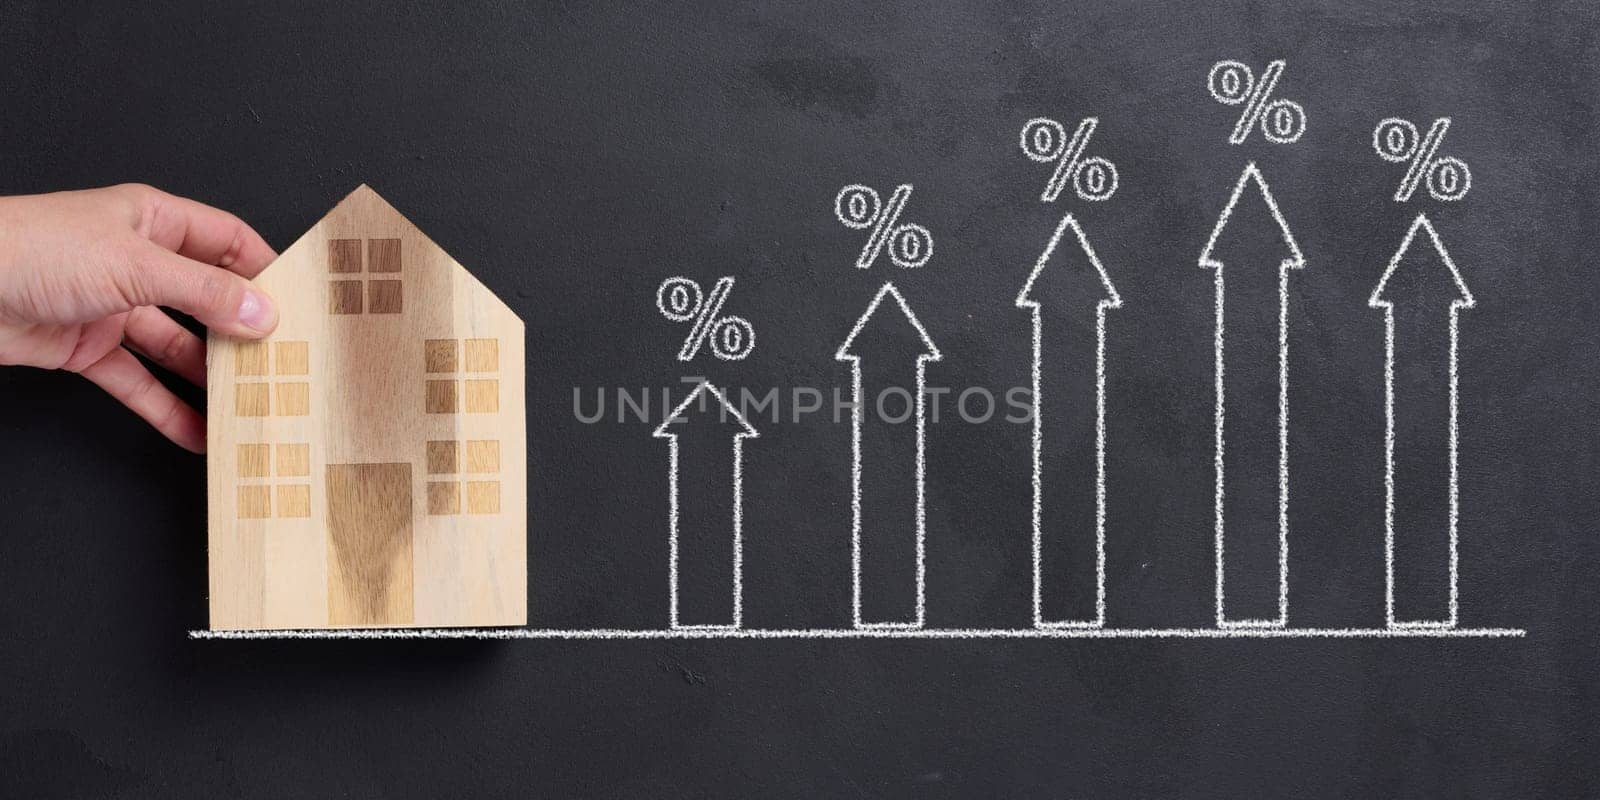 A woman's hand holds a miniature wooden house, and nearby there are drawn upward arrows with percentage signs, concept of mortgage rate growth and rising rental prices